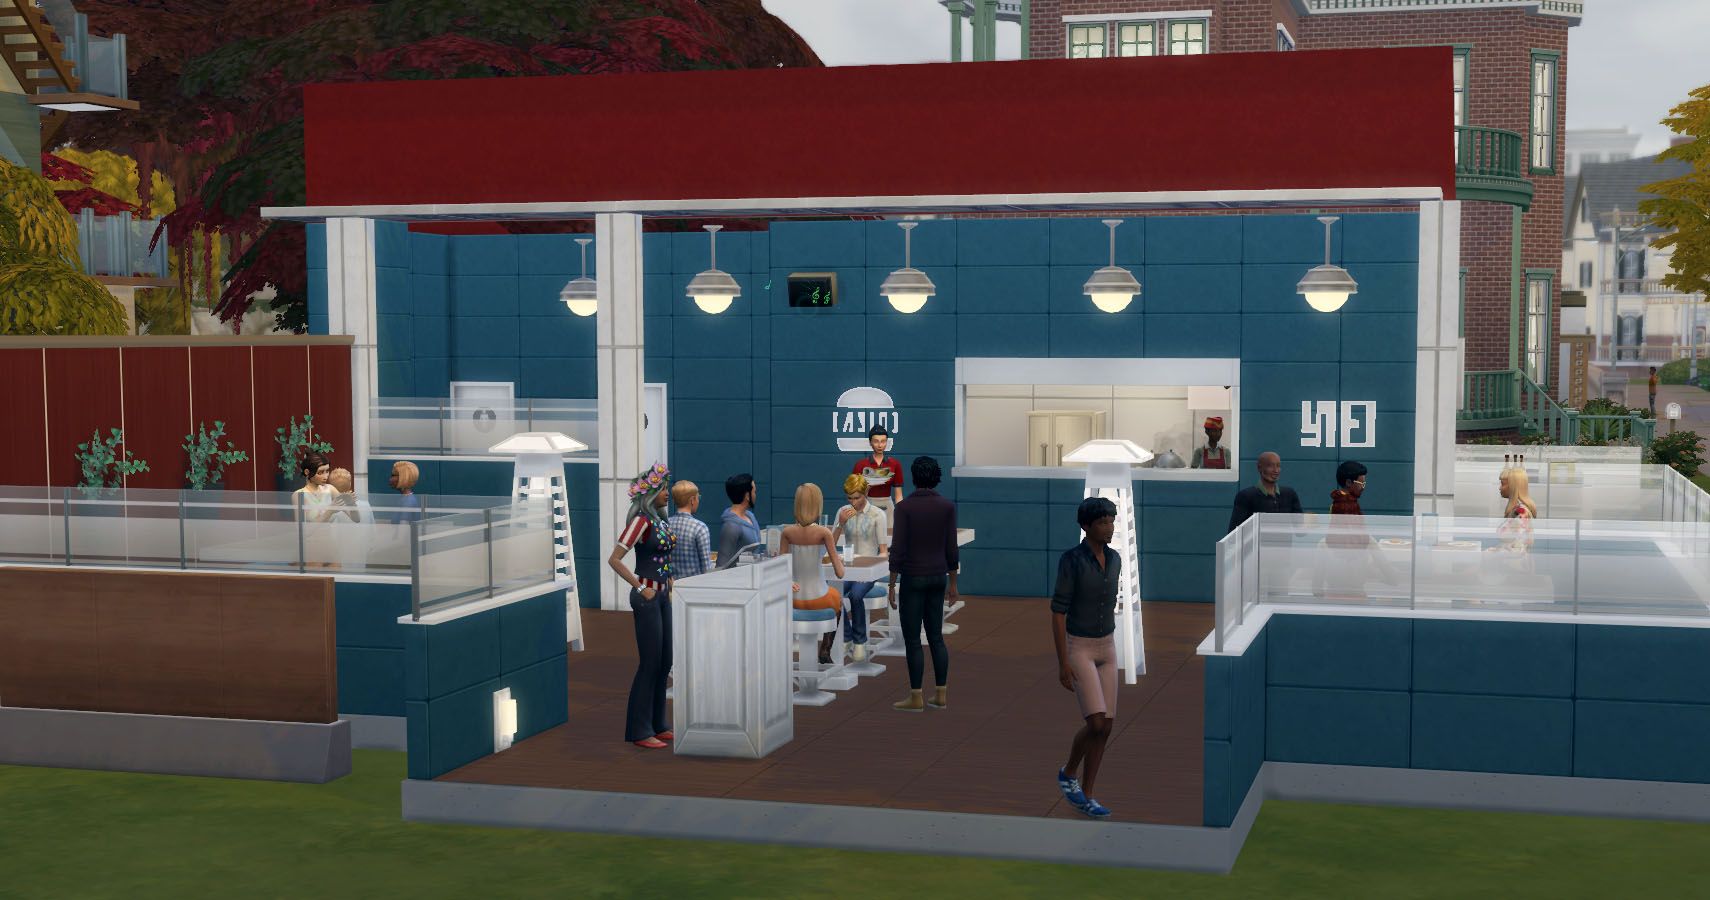 A small outdoor starter diner